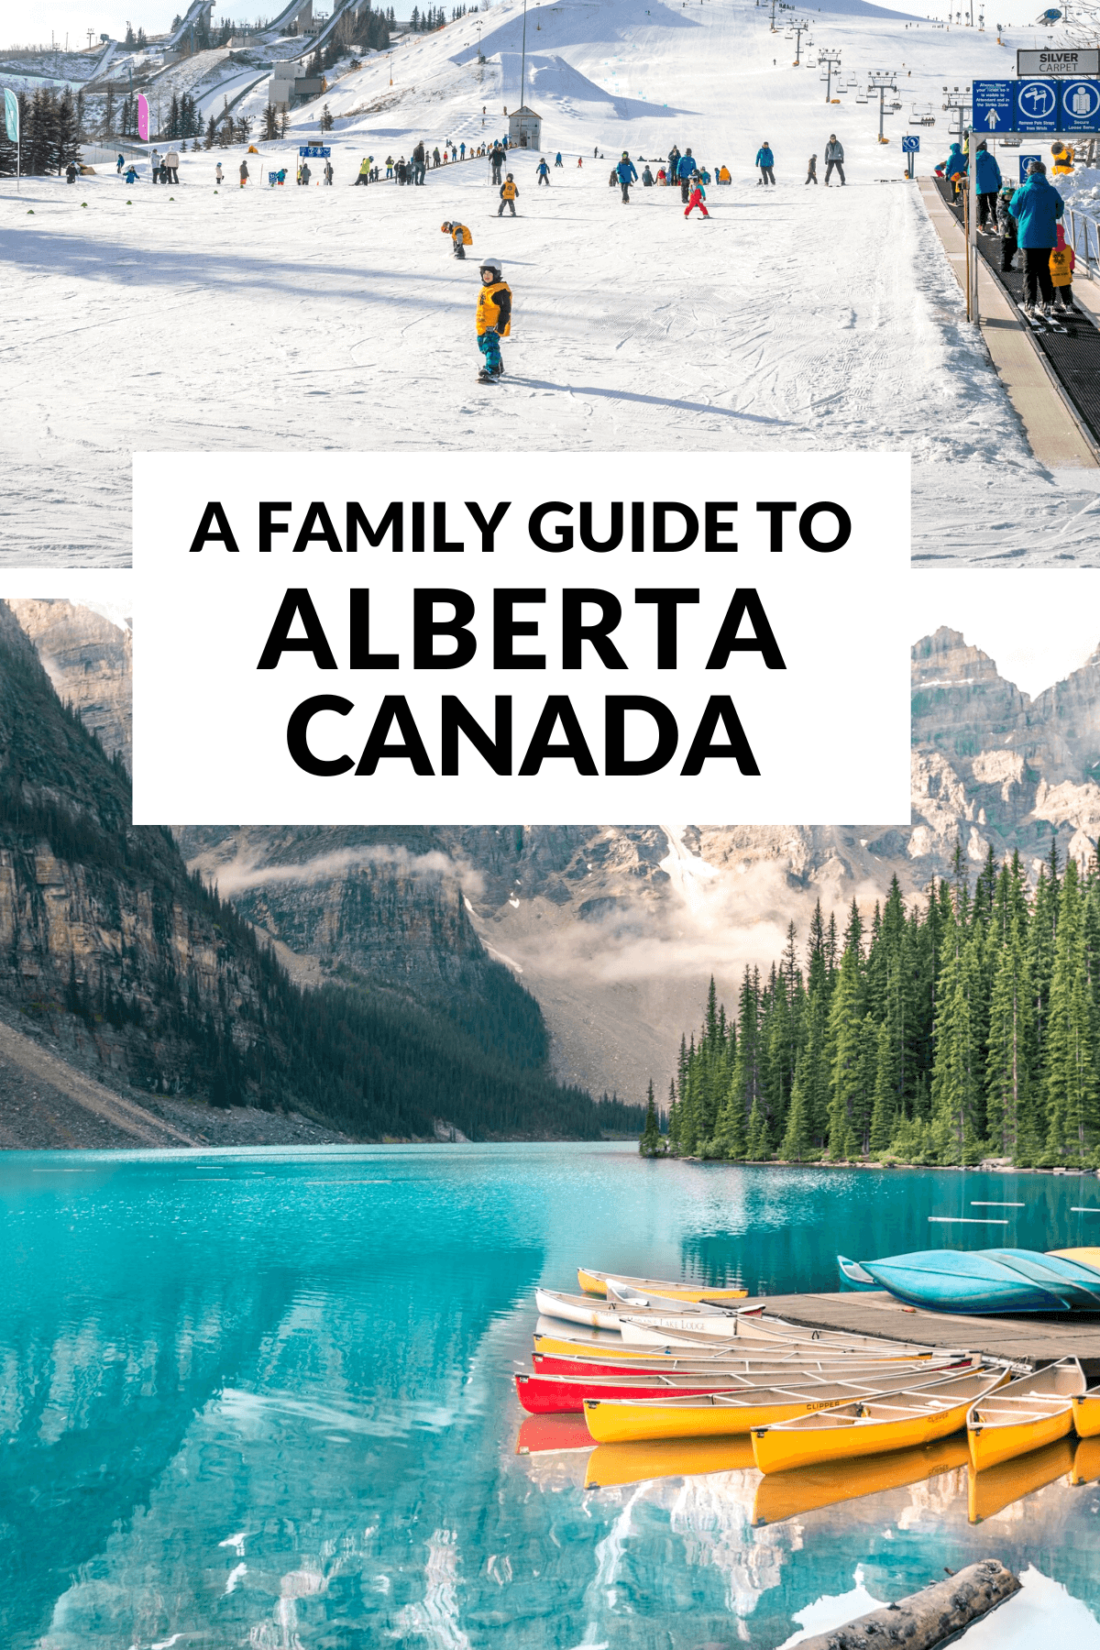 With iconic mountain landscapes, prairies, good food, friendly locals, rich history and a culture of adventure, Alberta is the perfect Canadian province to visit for families looking to create memories for a lifetime. 